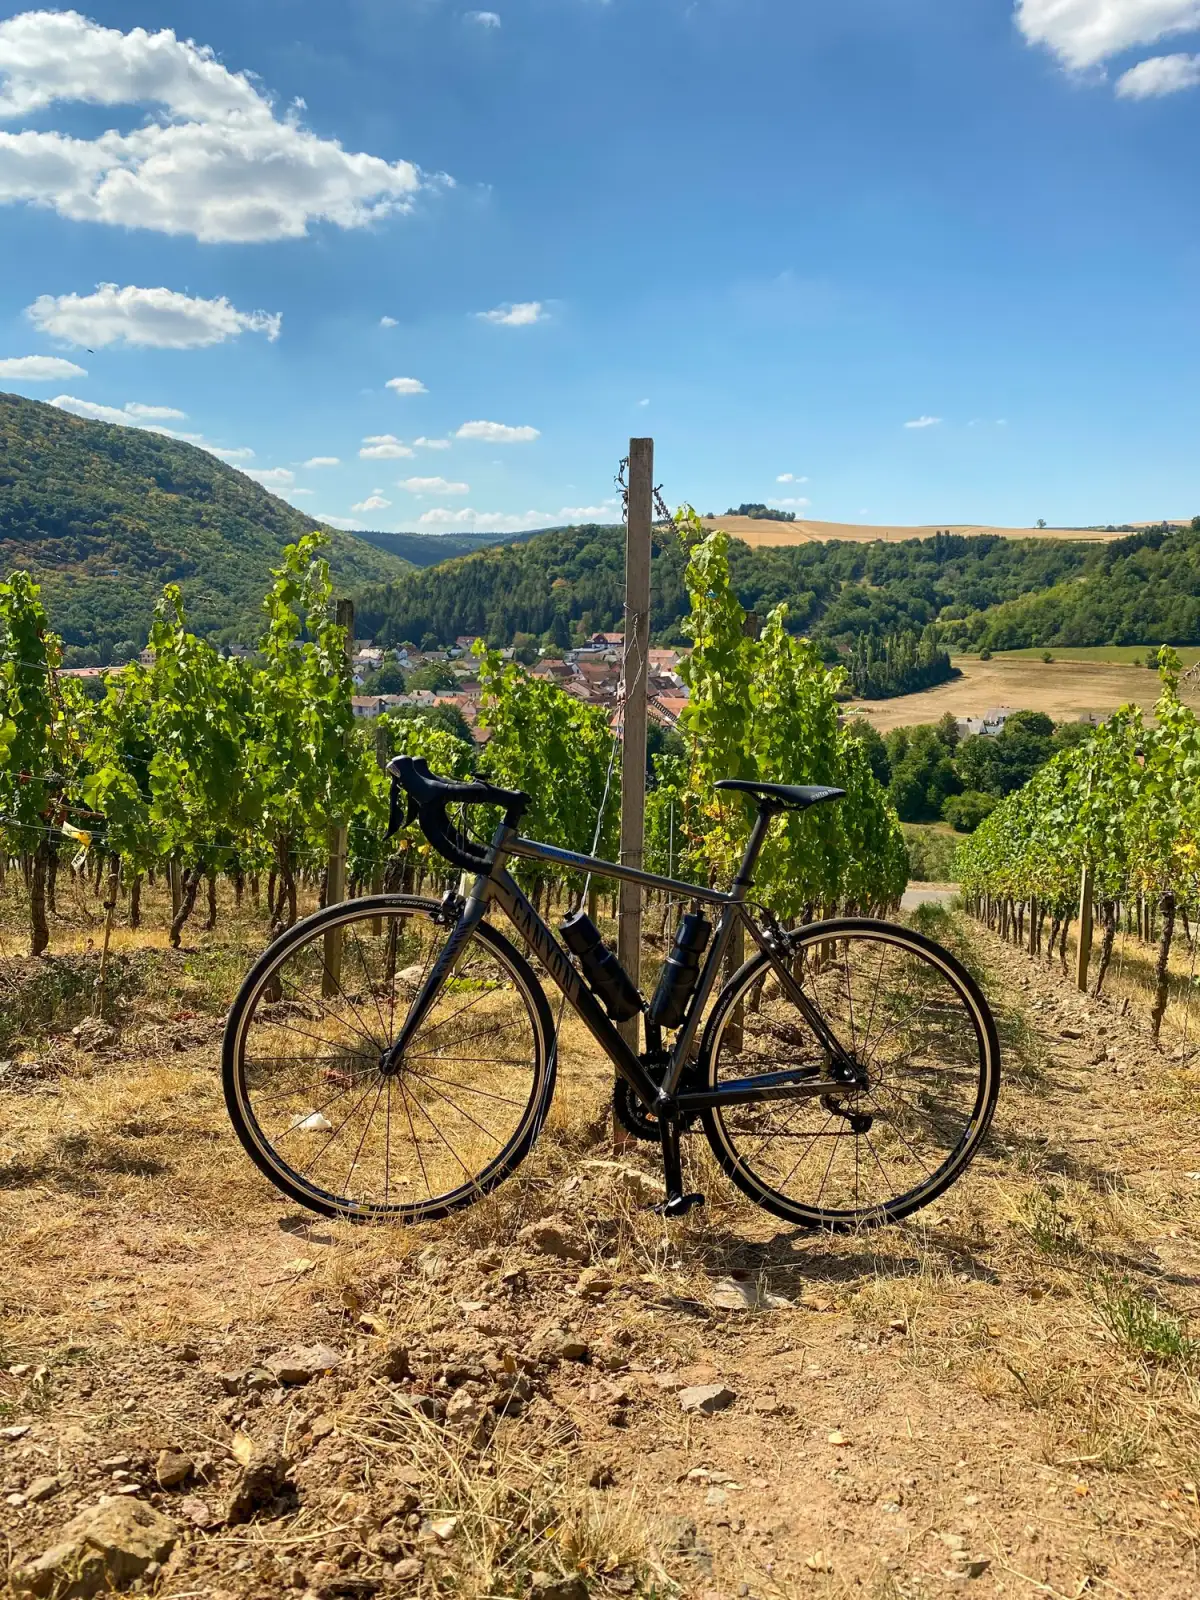 Black road bicycle standing upright in a sunlit vineyard, with rows of grapevines stretching into the distance, a quaint village nestled in a valley, and a backdrop of rolling hills under a blue sky with scattered clouds.